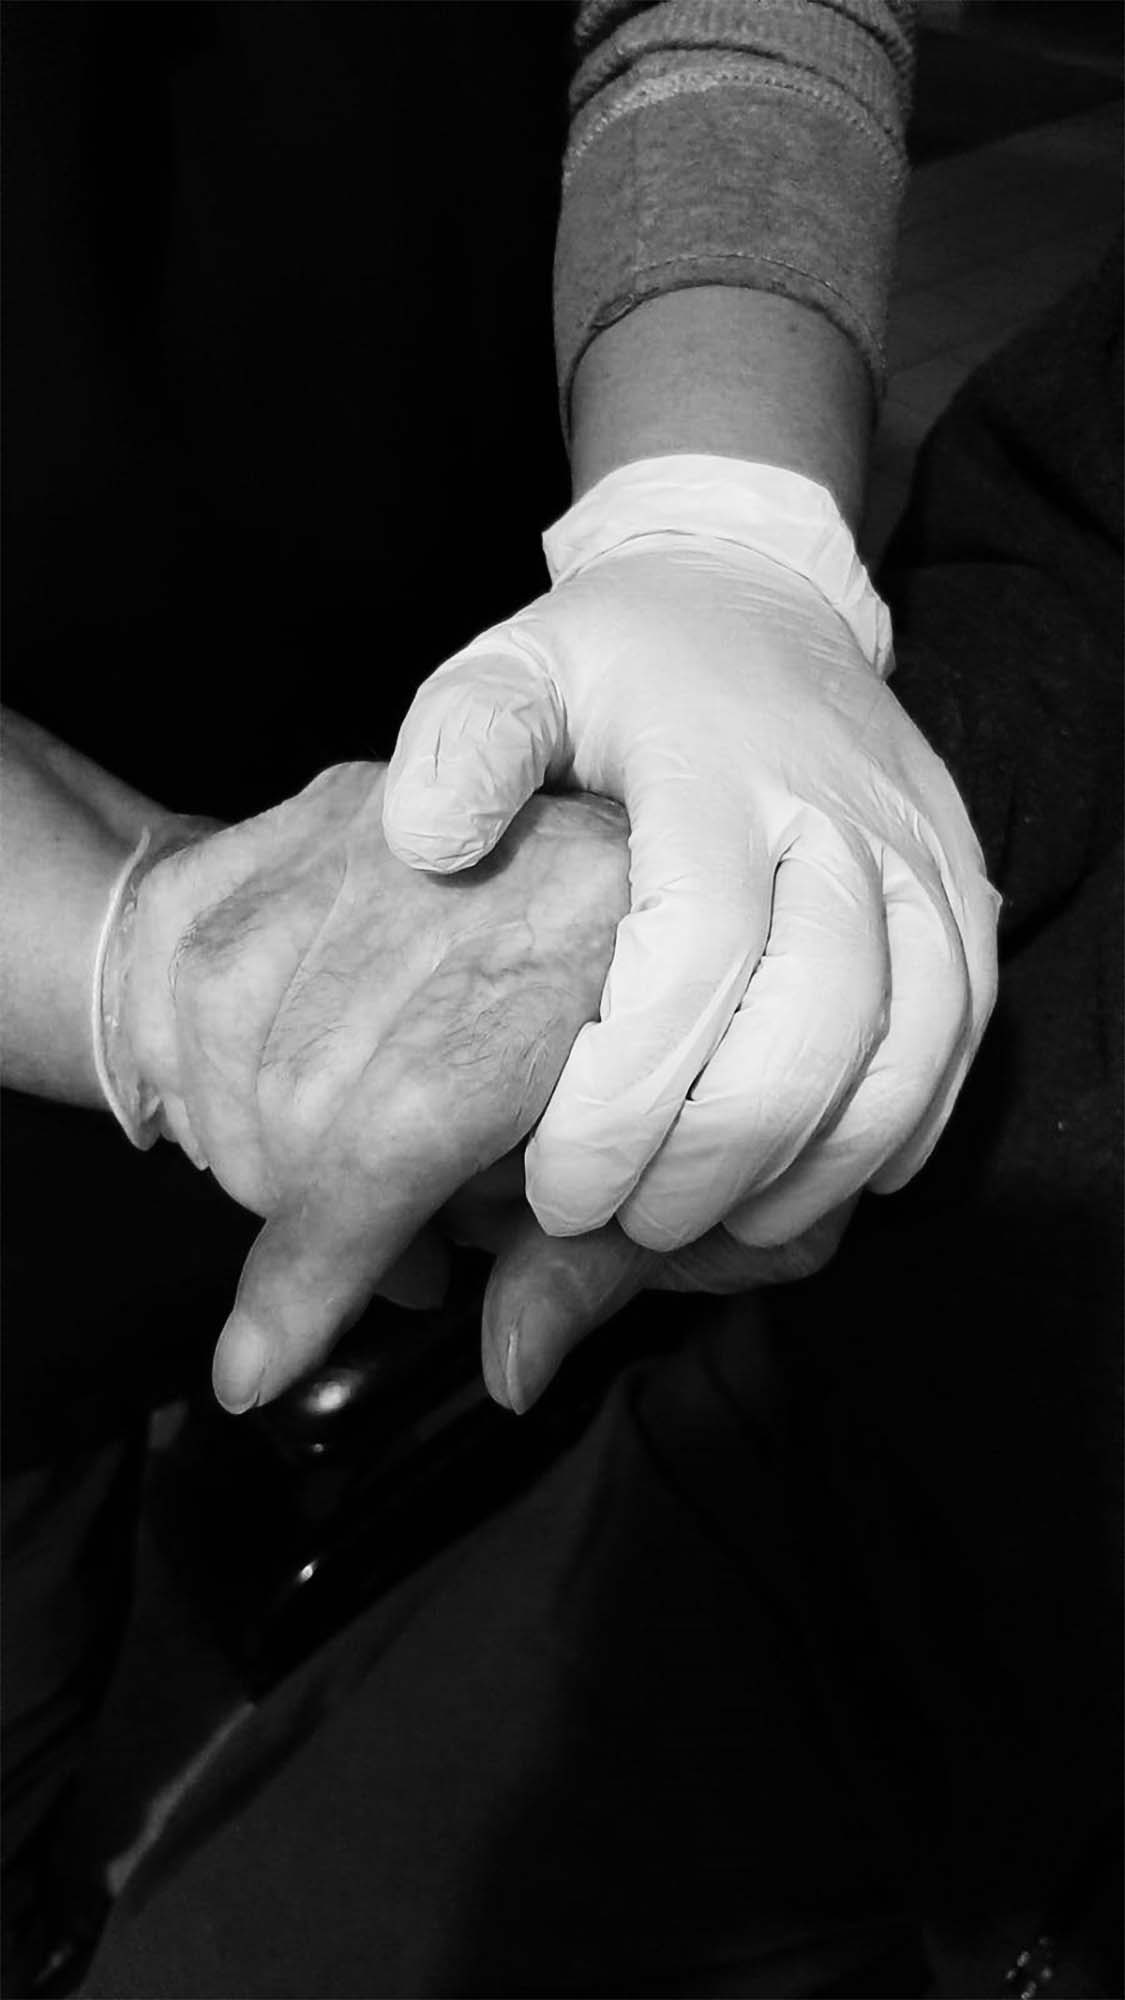 A gloved hand holding another ungloved hand